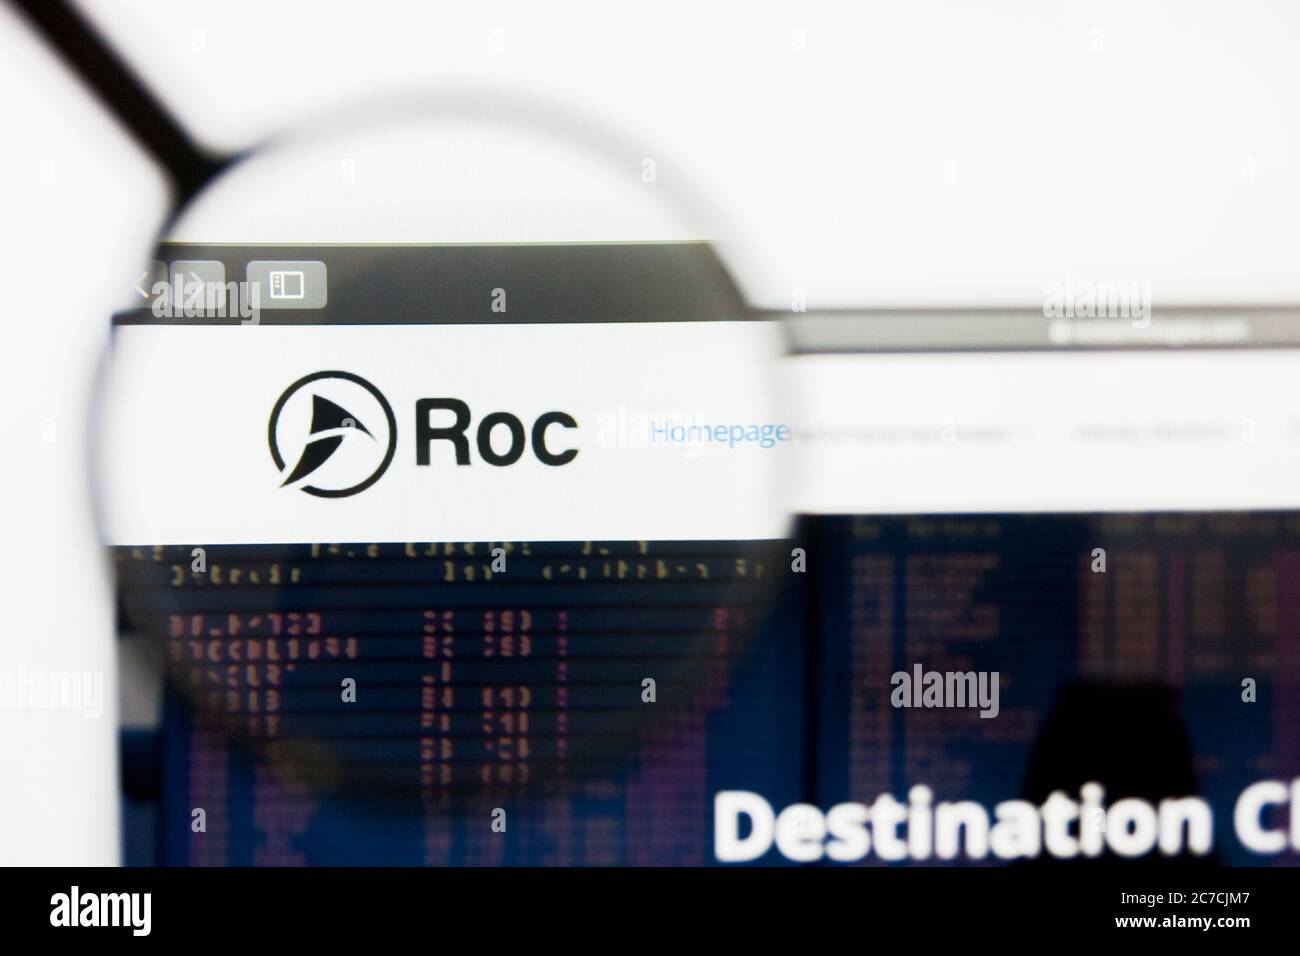 San Francisco, California, USA - 29 March 2019: Illustrative Editorial of Roc Technologies website homepage. Roc Technologies logo visible on display Stock Photo